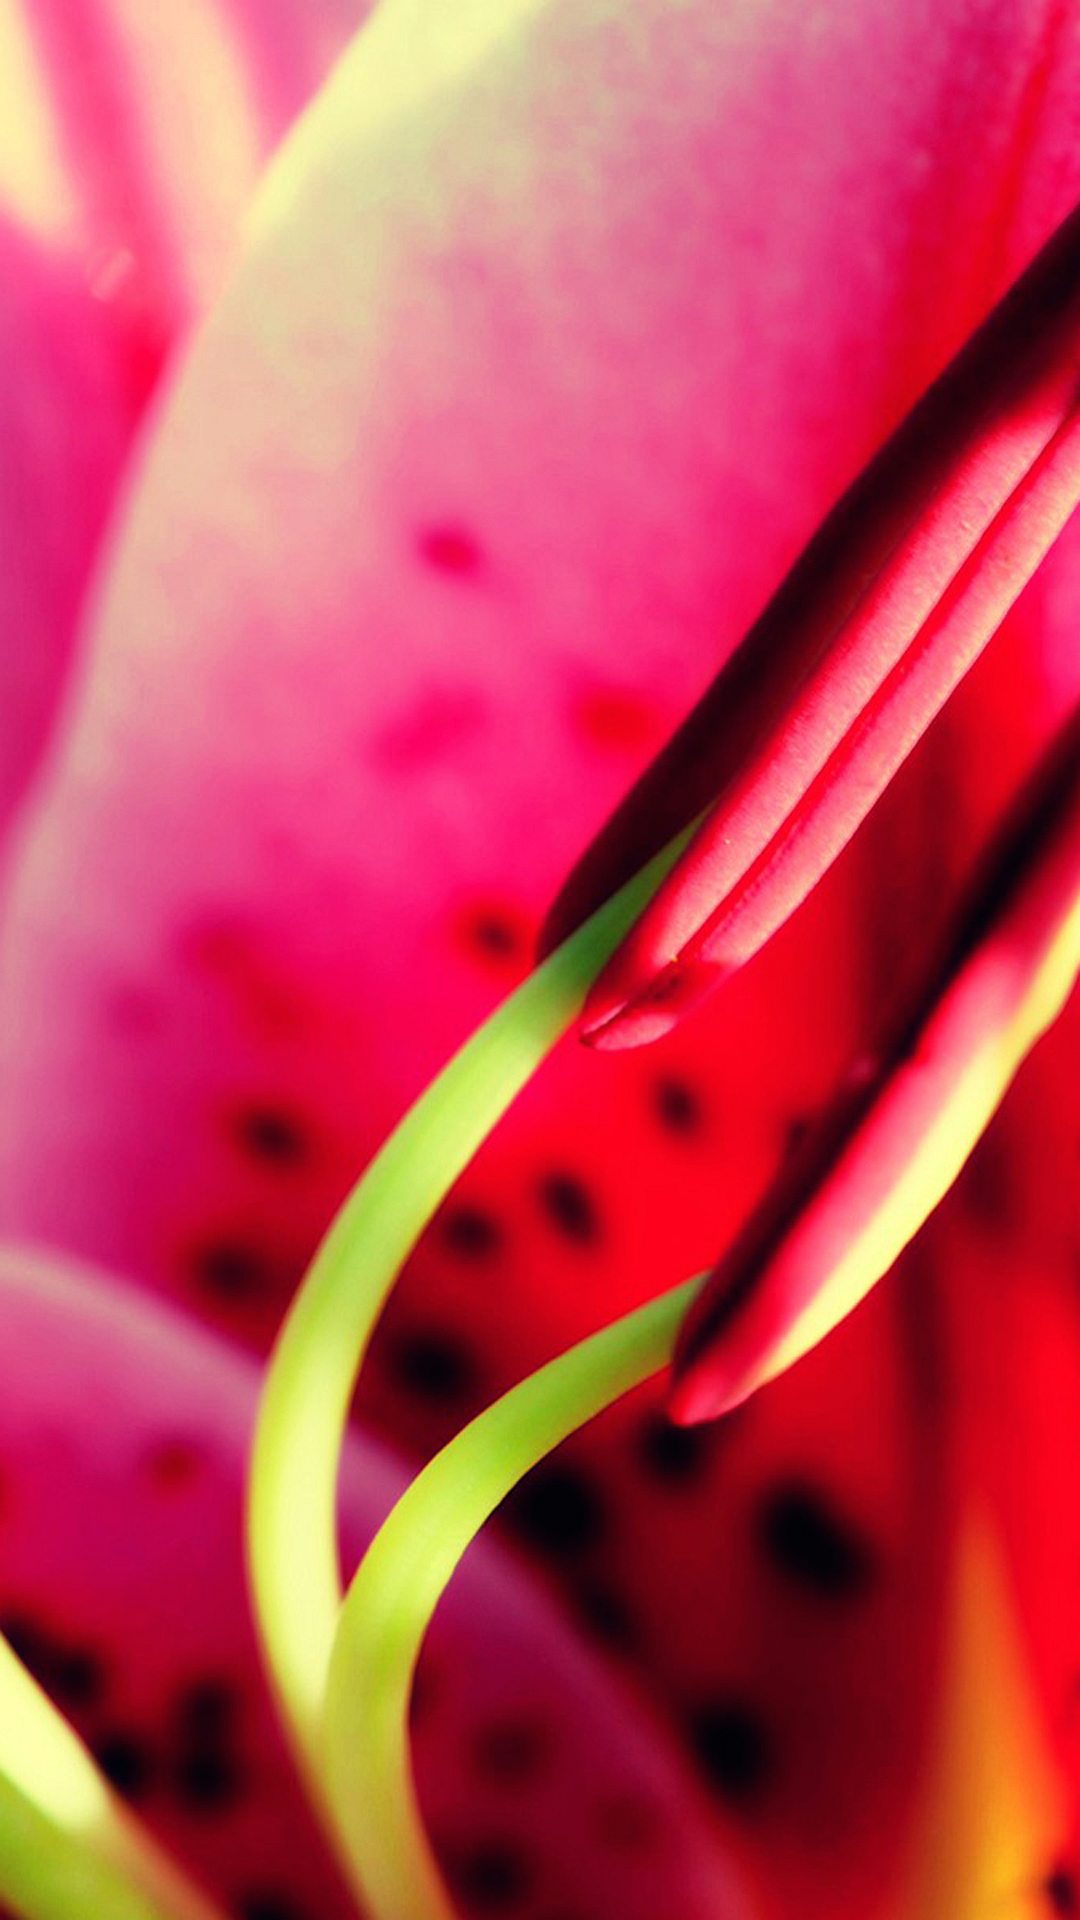 15 Awesome LG G Flex Wallpapers